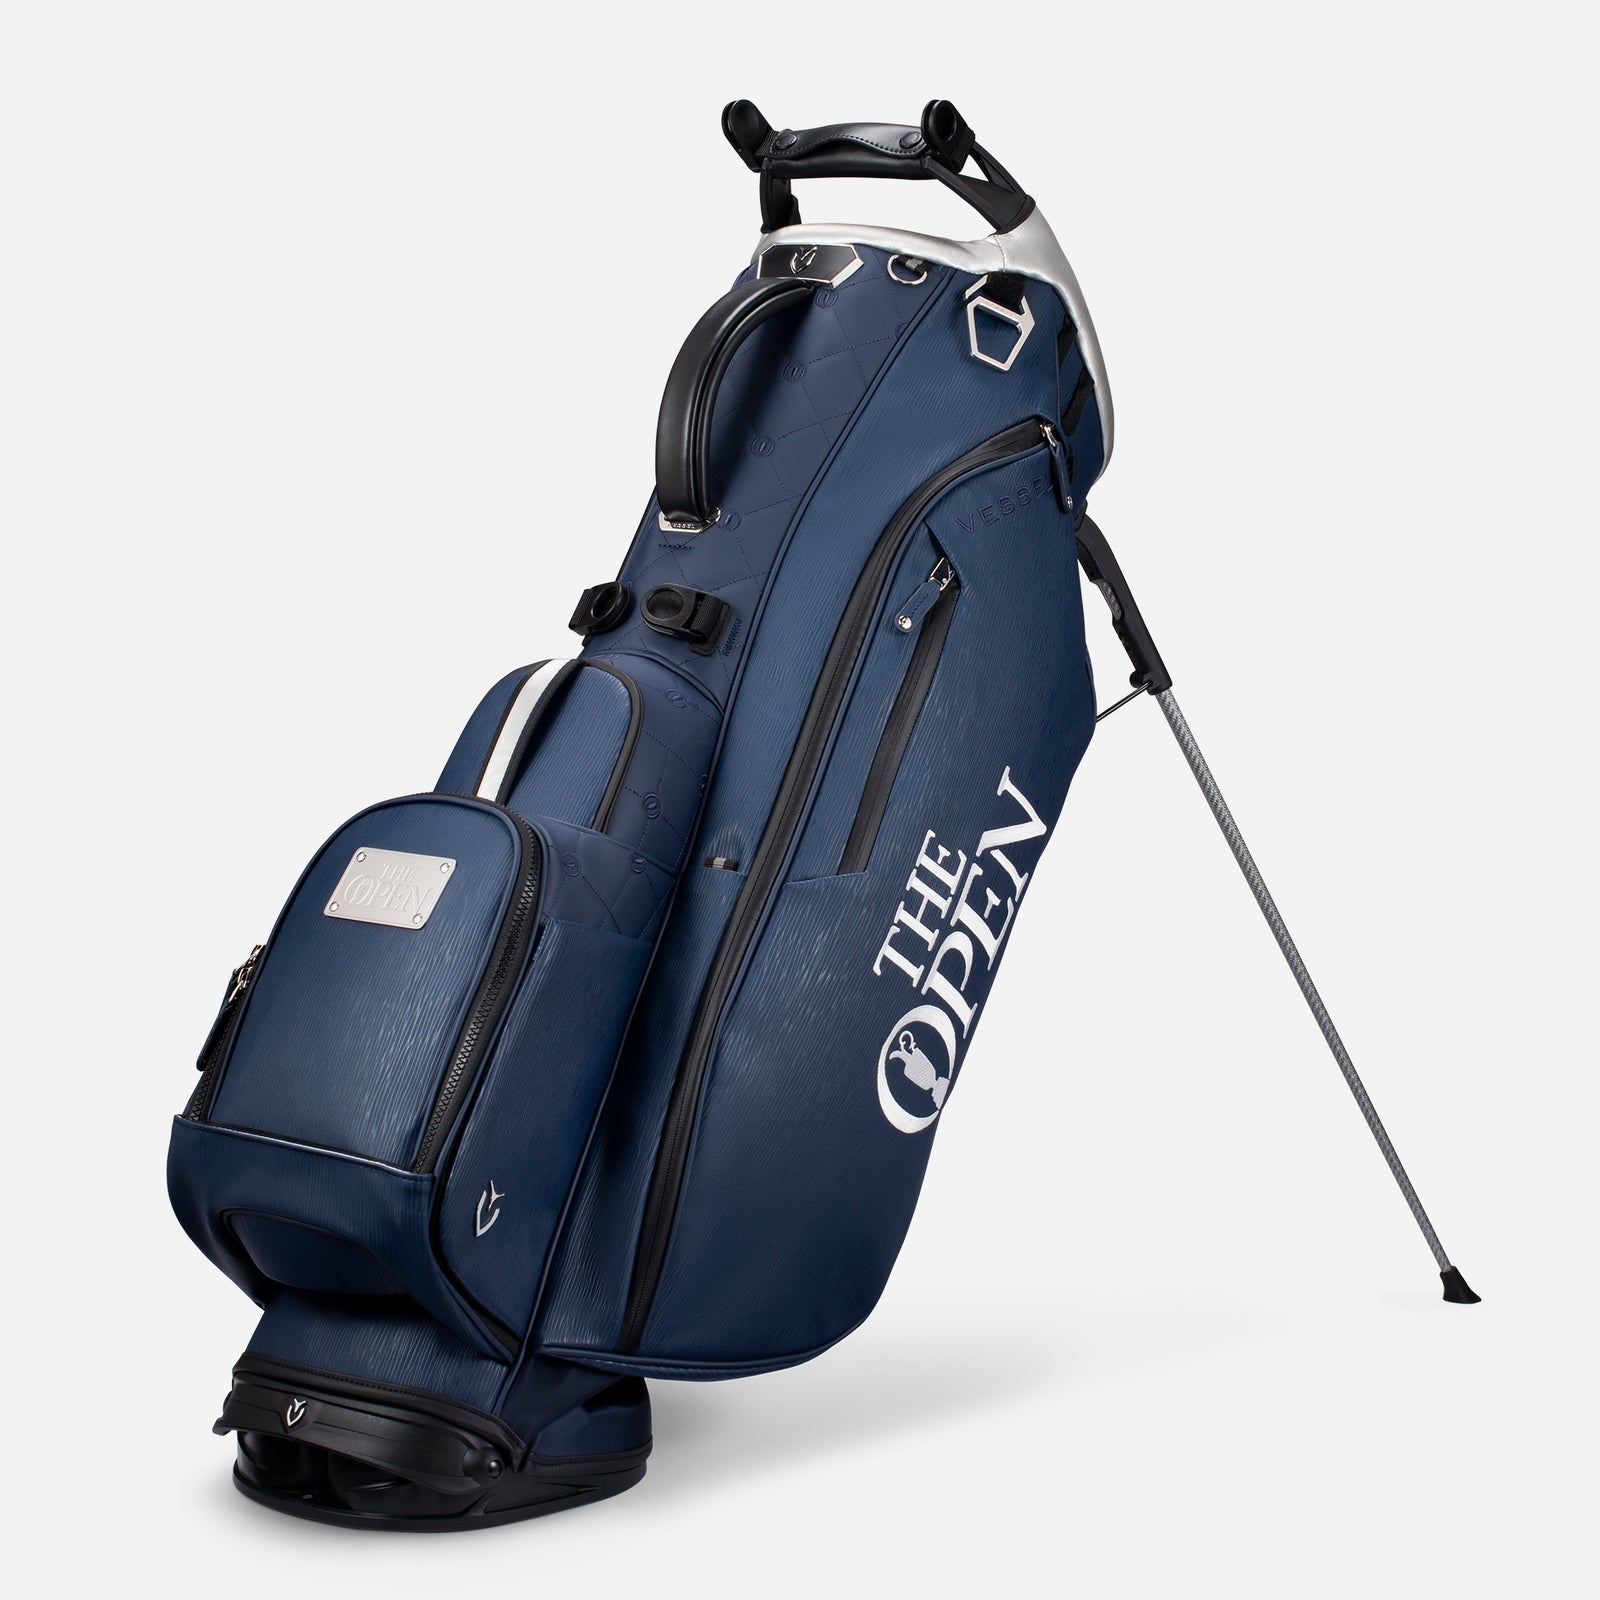 The Open x VESSEL Player IV Pro Stand